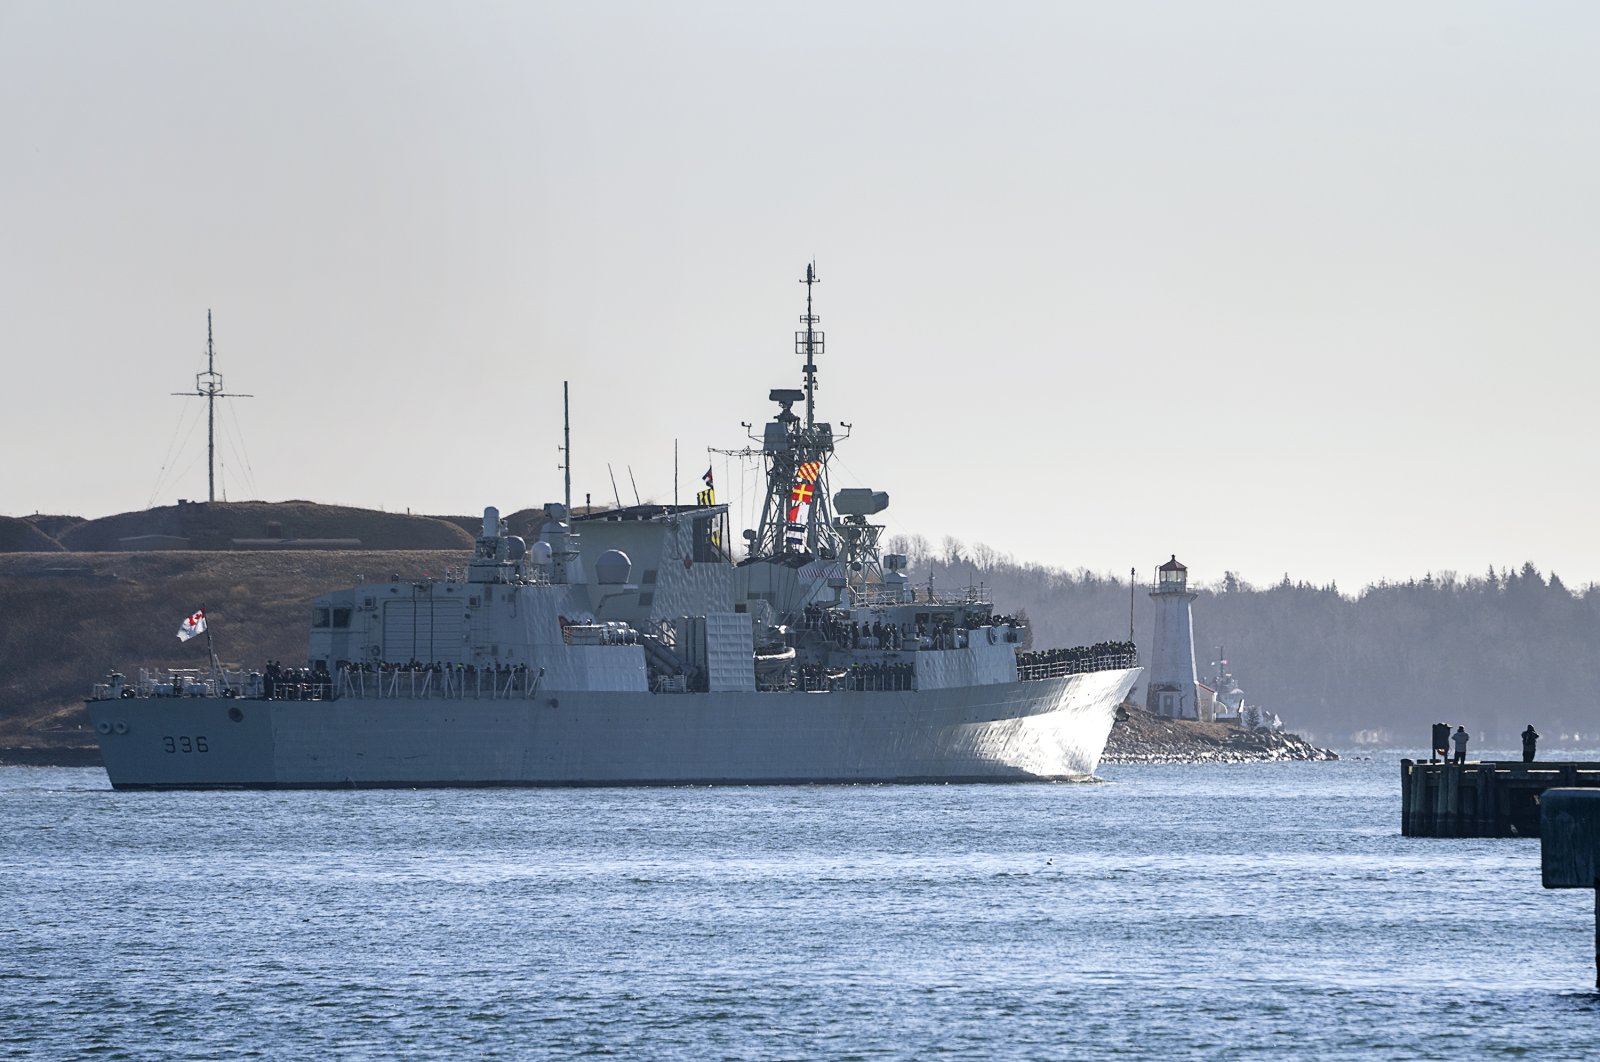 HMCS Montreal departs Halifax for a six-month deployment on a NATO mission in the Mediterranean, Jan. 19, 2022. (AP Photo)